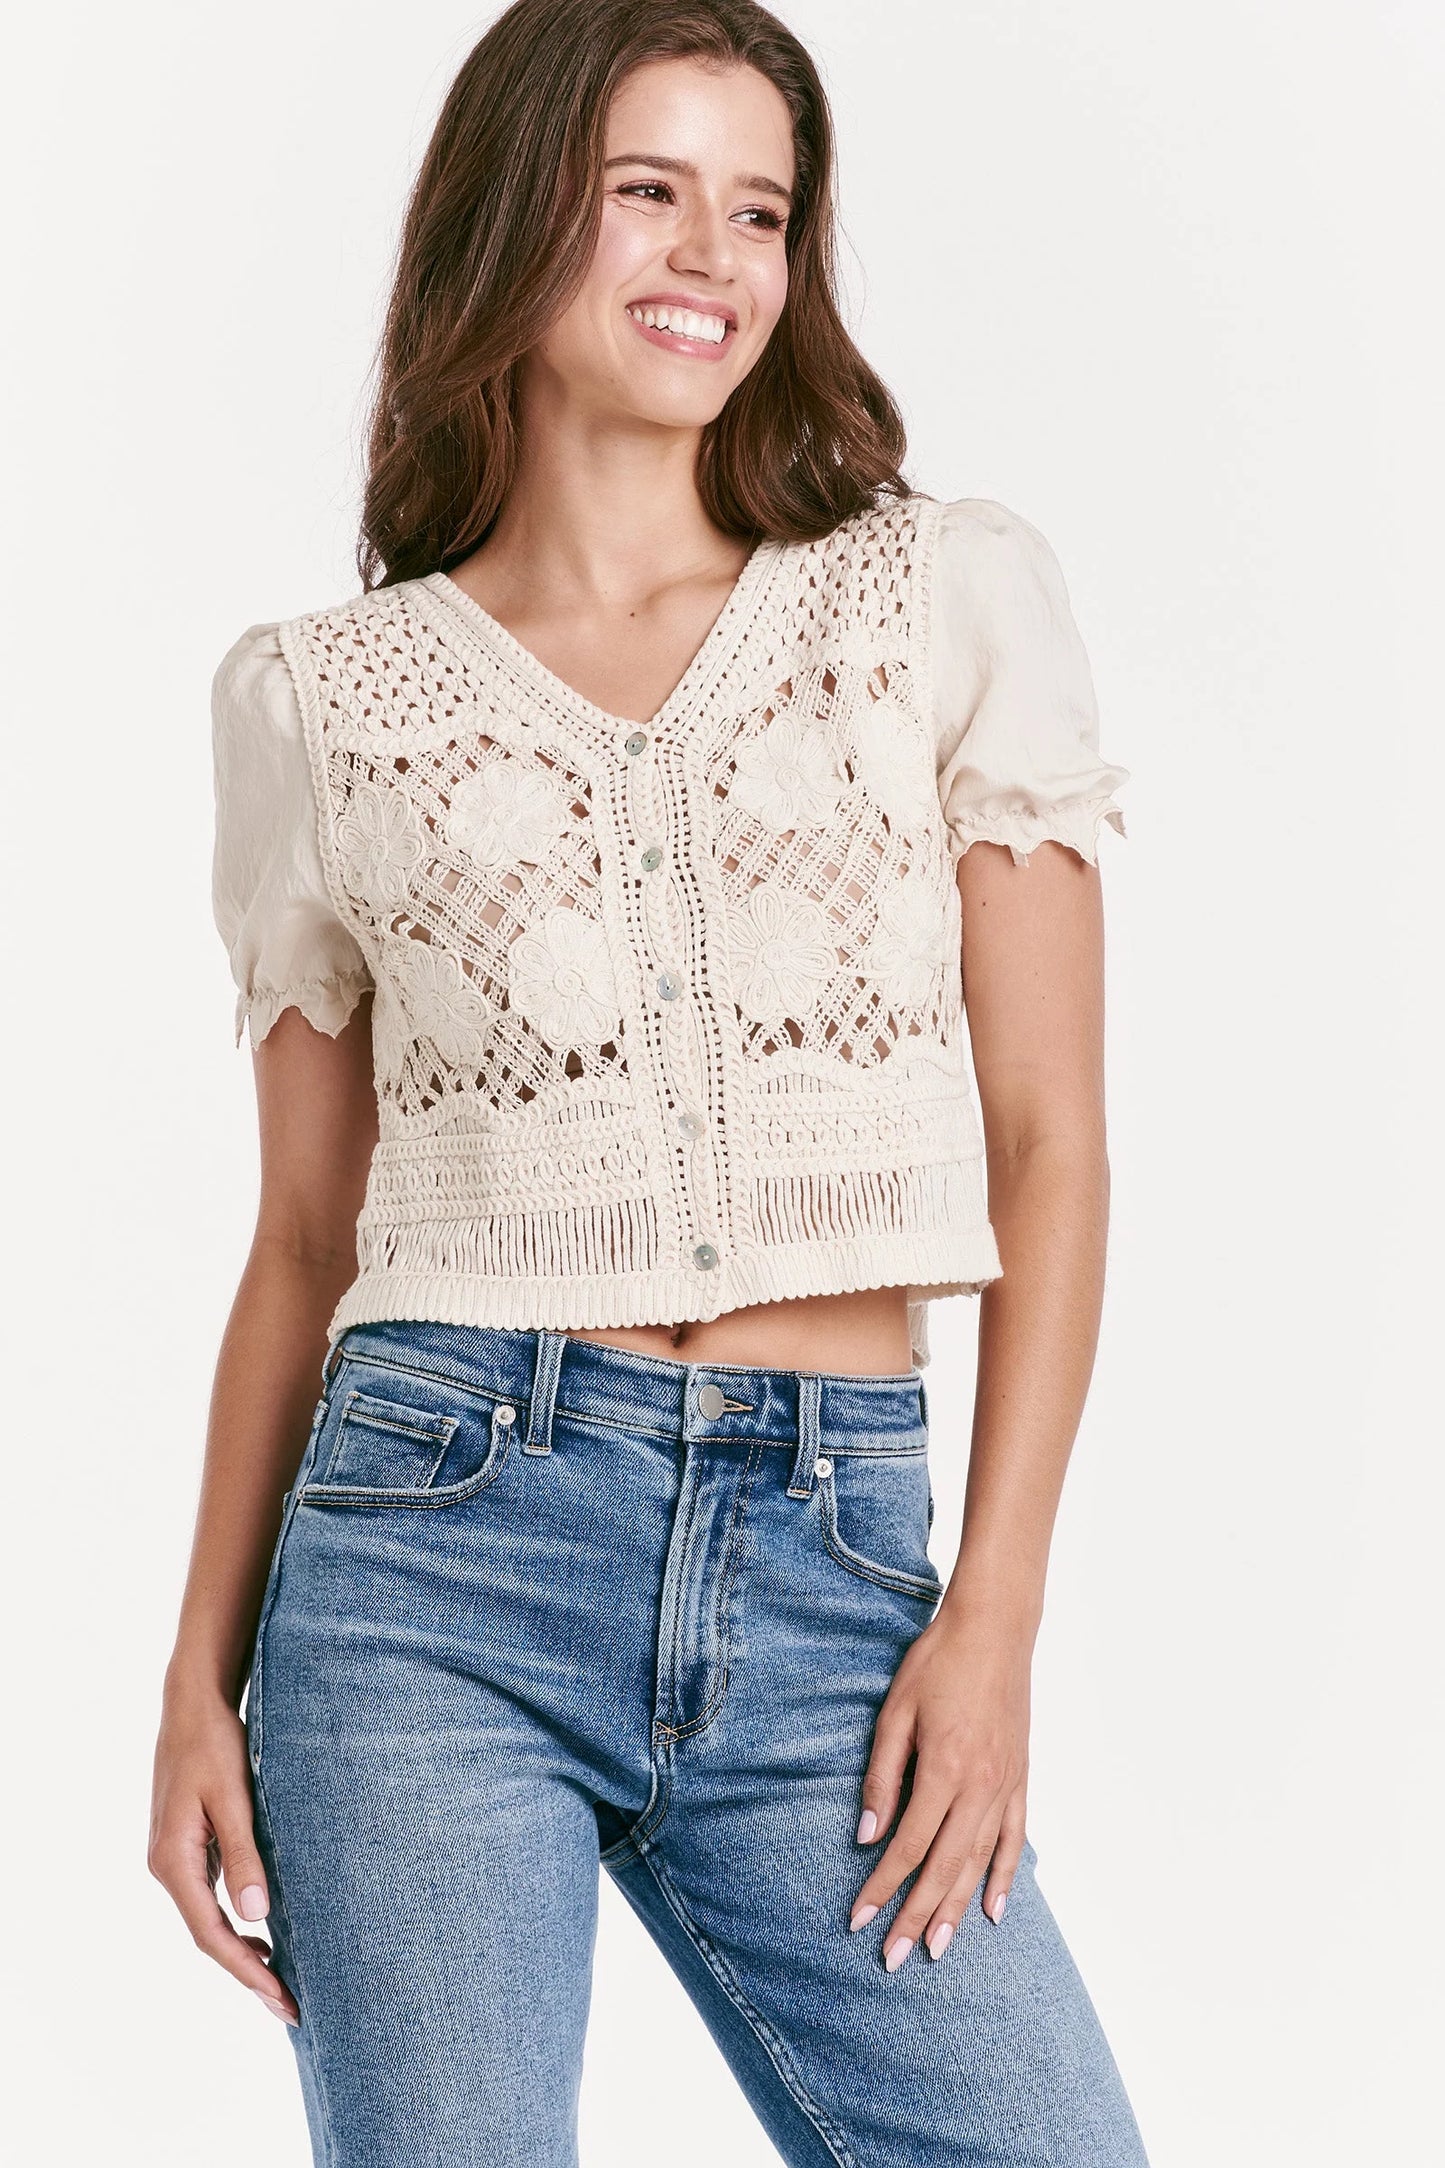 Belize Mesh Button Up Sweater in vintage cream by Another Love